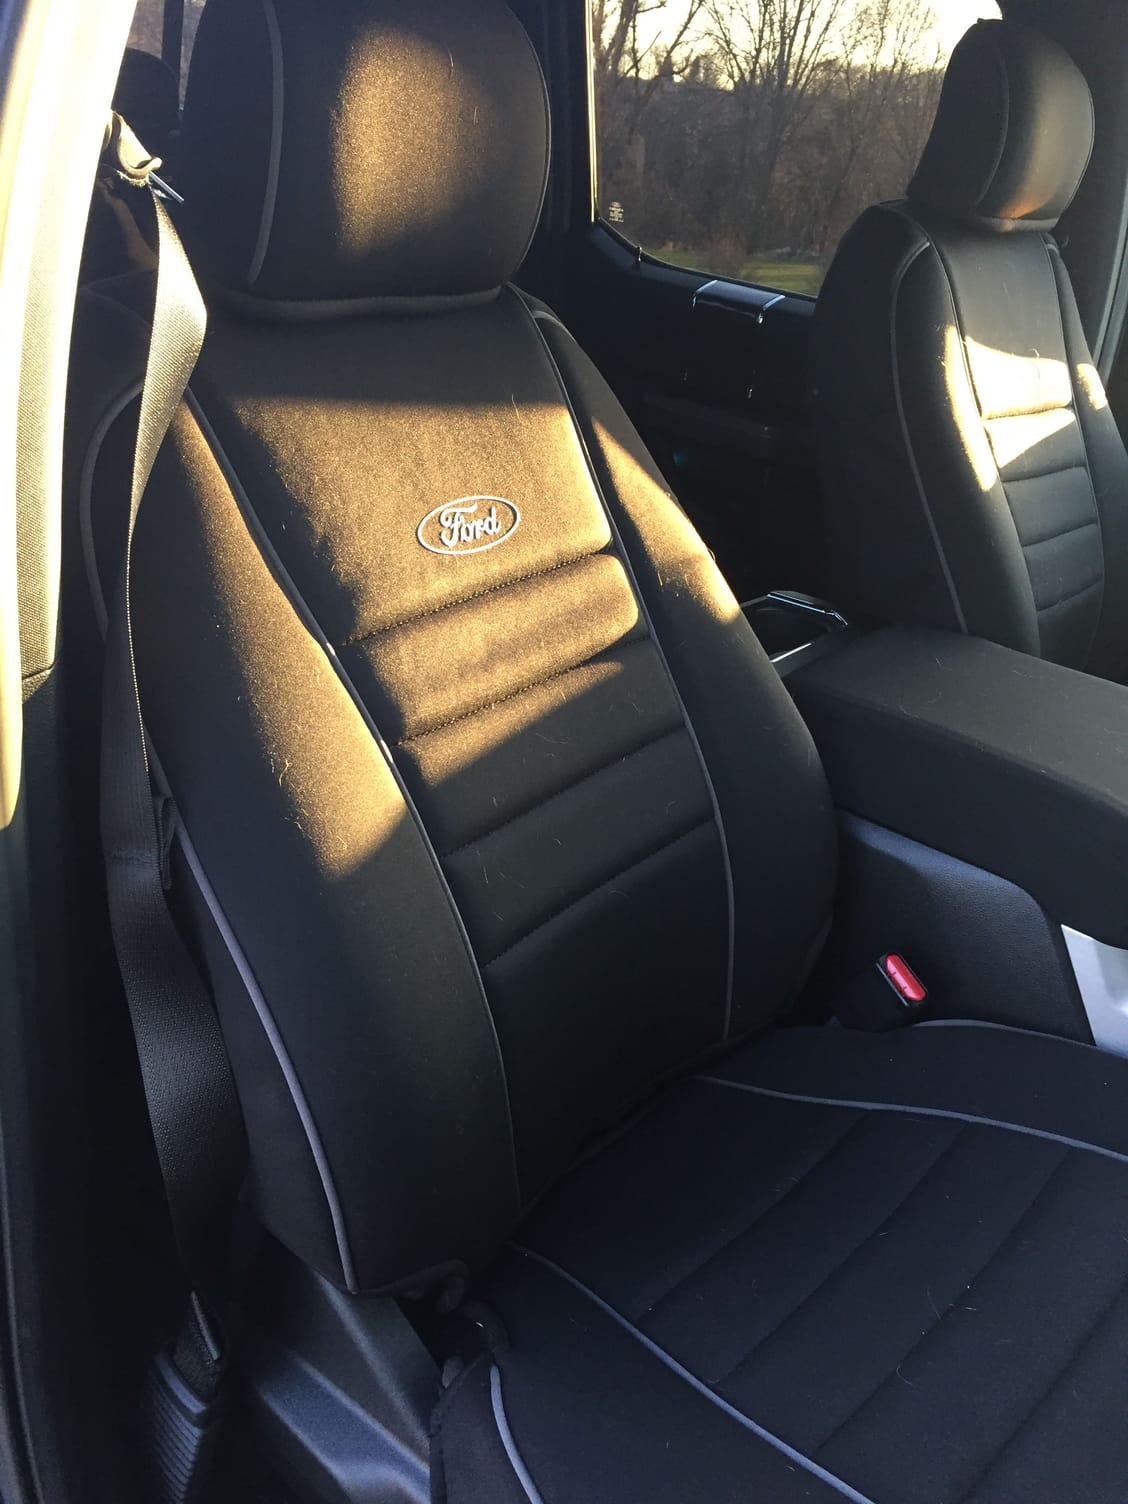 Best seat covers and steering wheel cover? - Page 2 - Ford F150 Forum